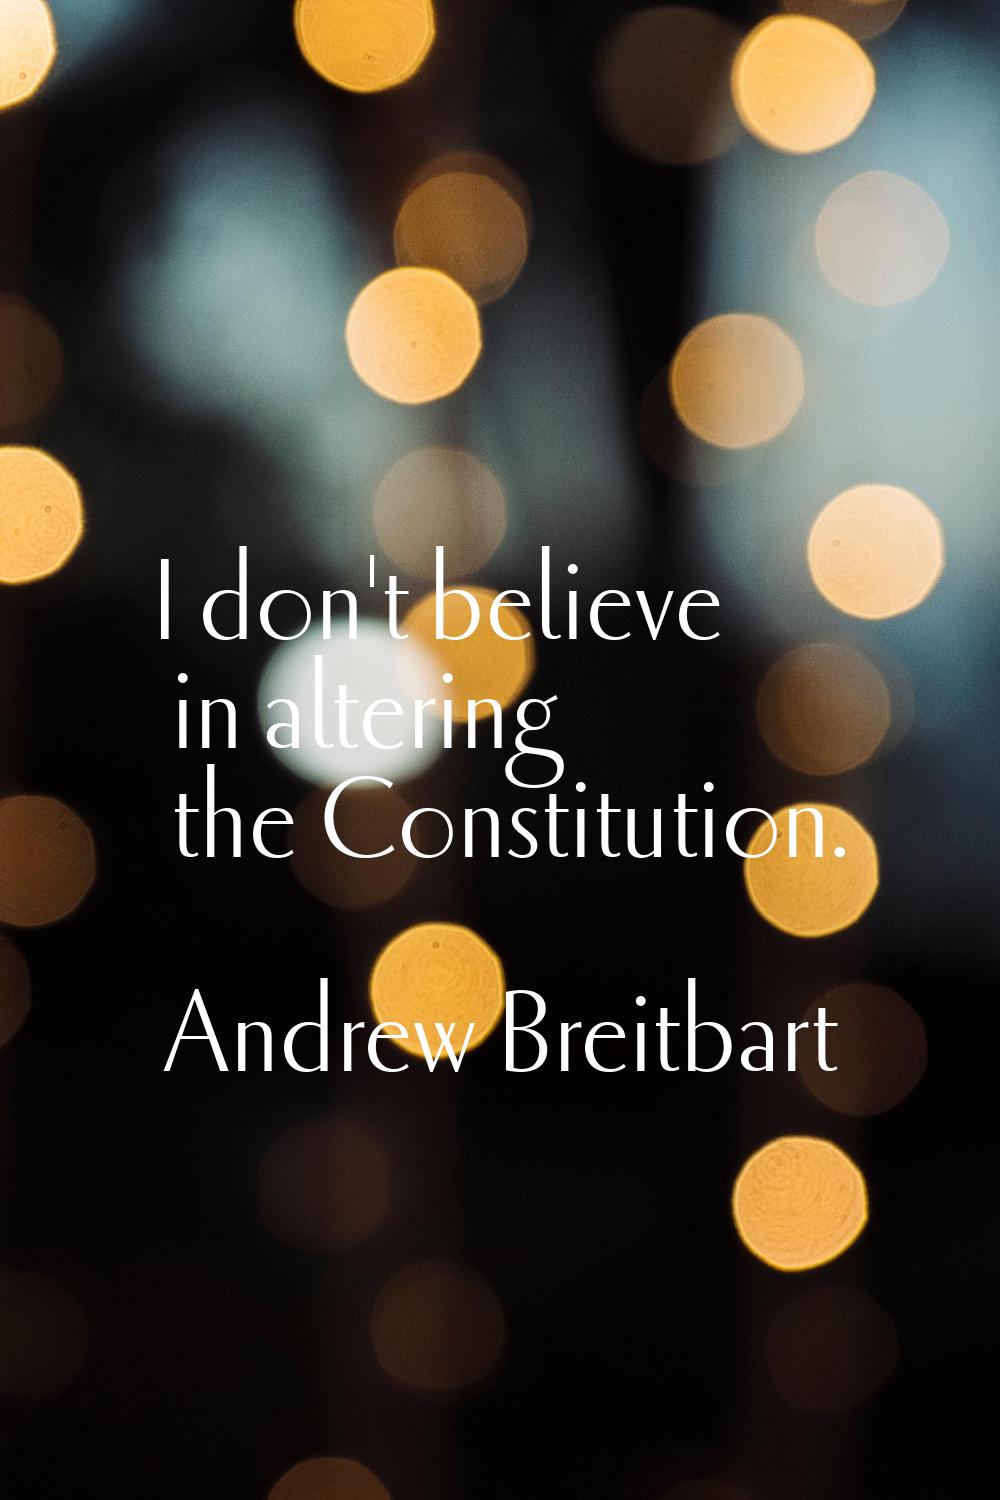 I don't believe in altering the Constitution.